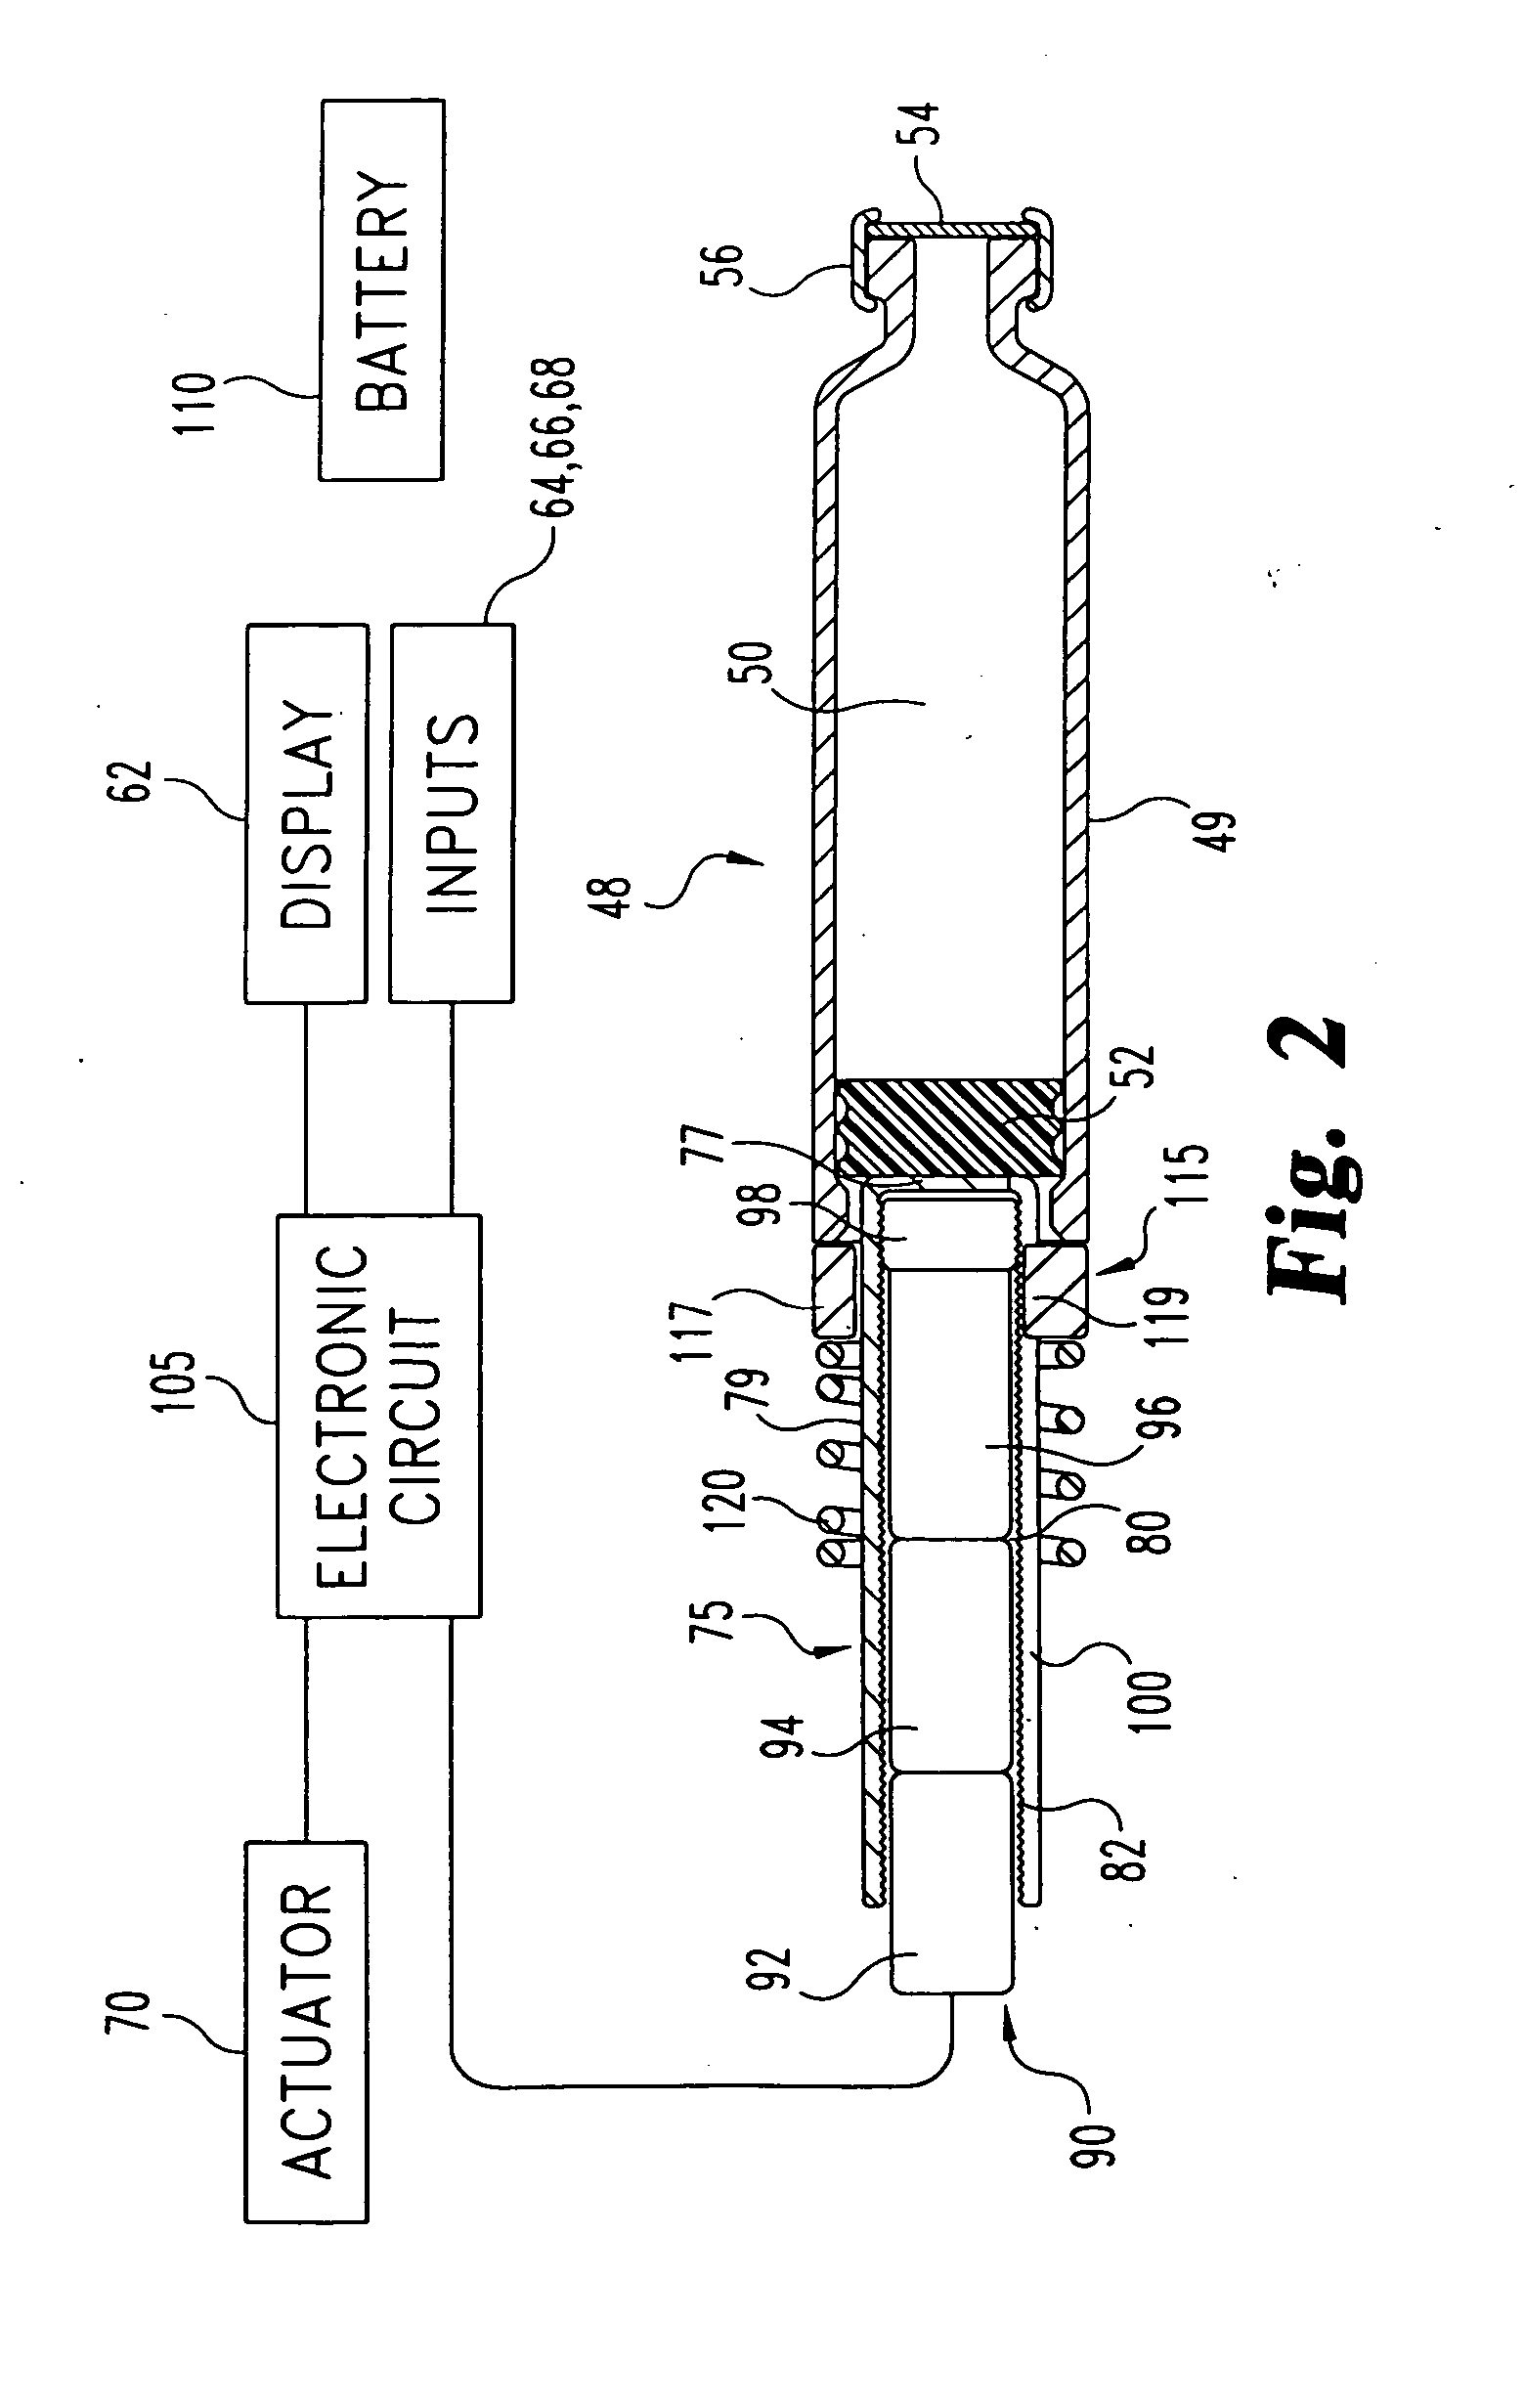 Medication injecting apparatus with fluid container piston-engaging drive member having internal hollow for accommodating drive member shifting mechanism